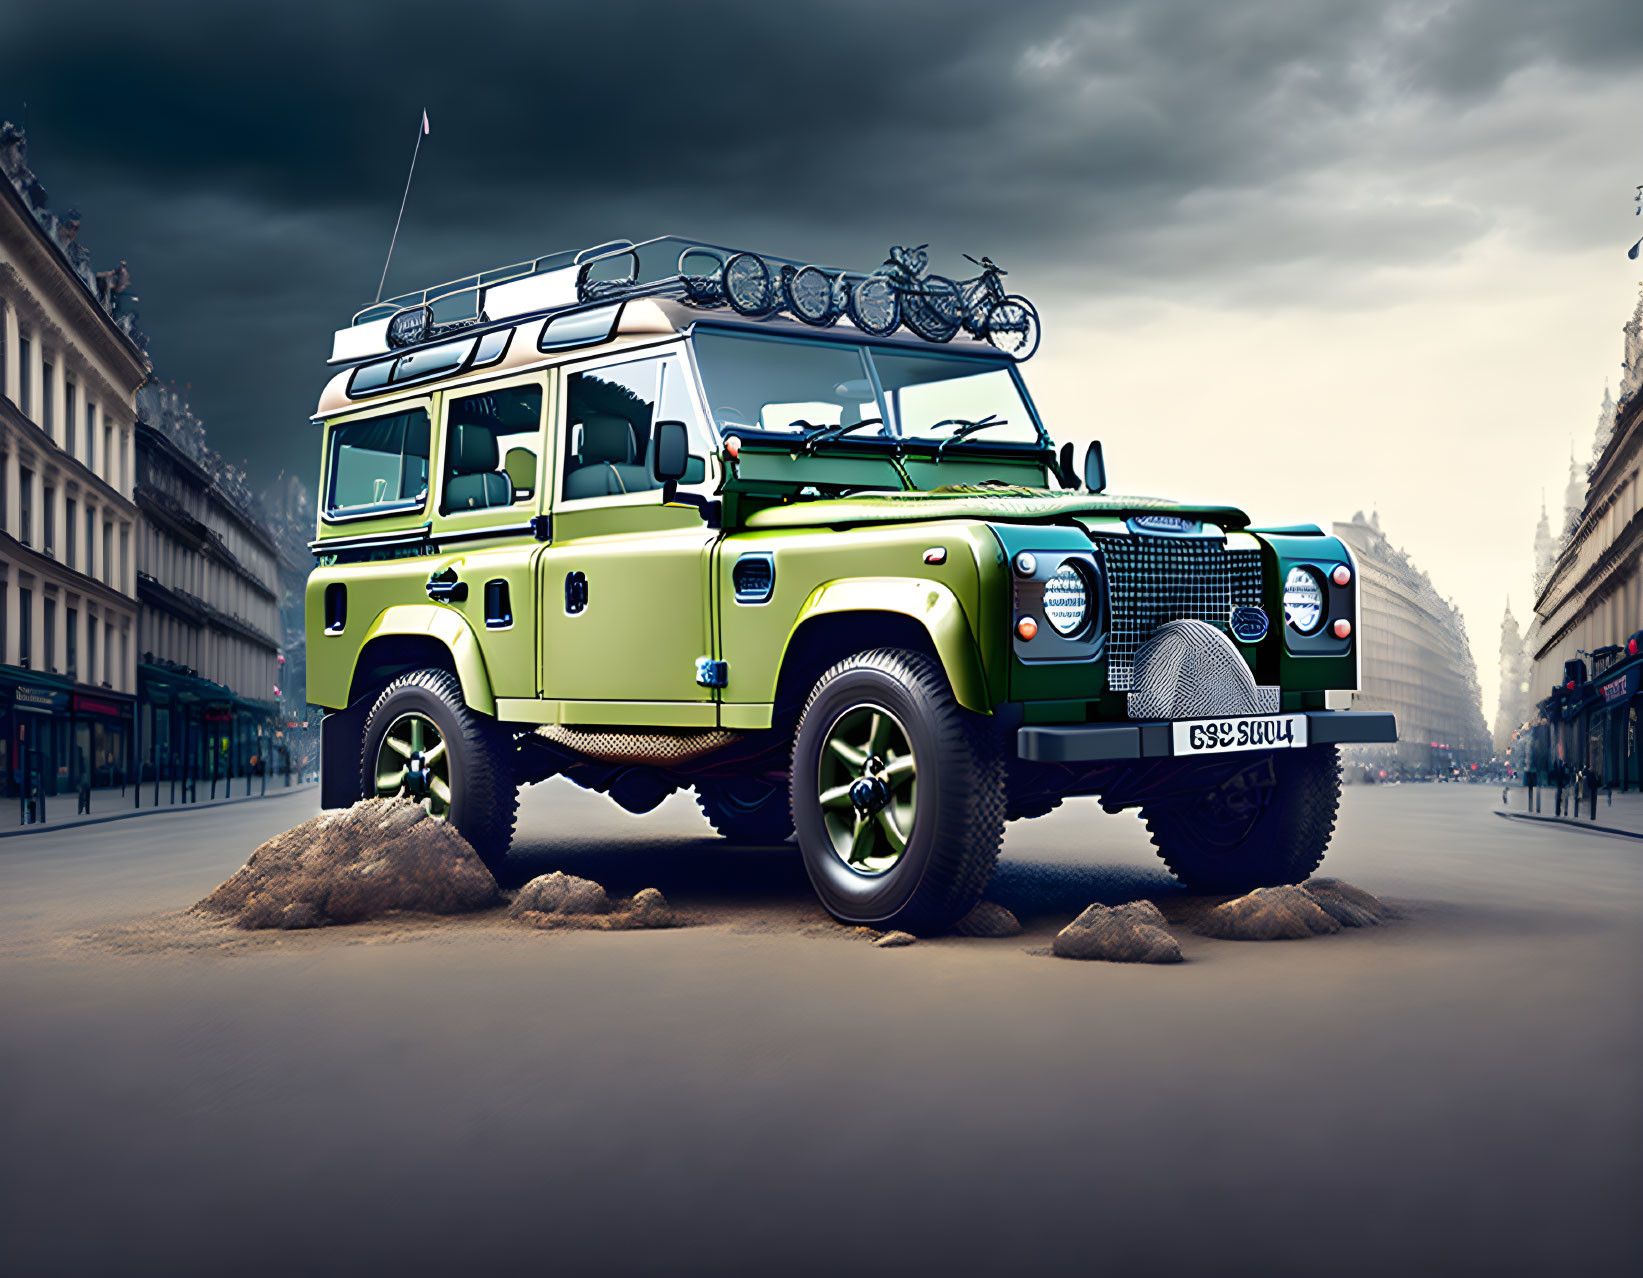 Lime Green Land Rover Defender with Roof Rack and Lights on Street